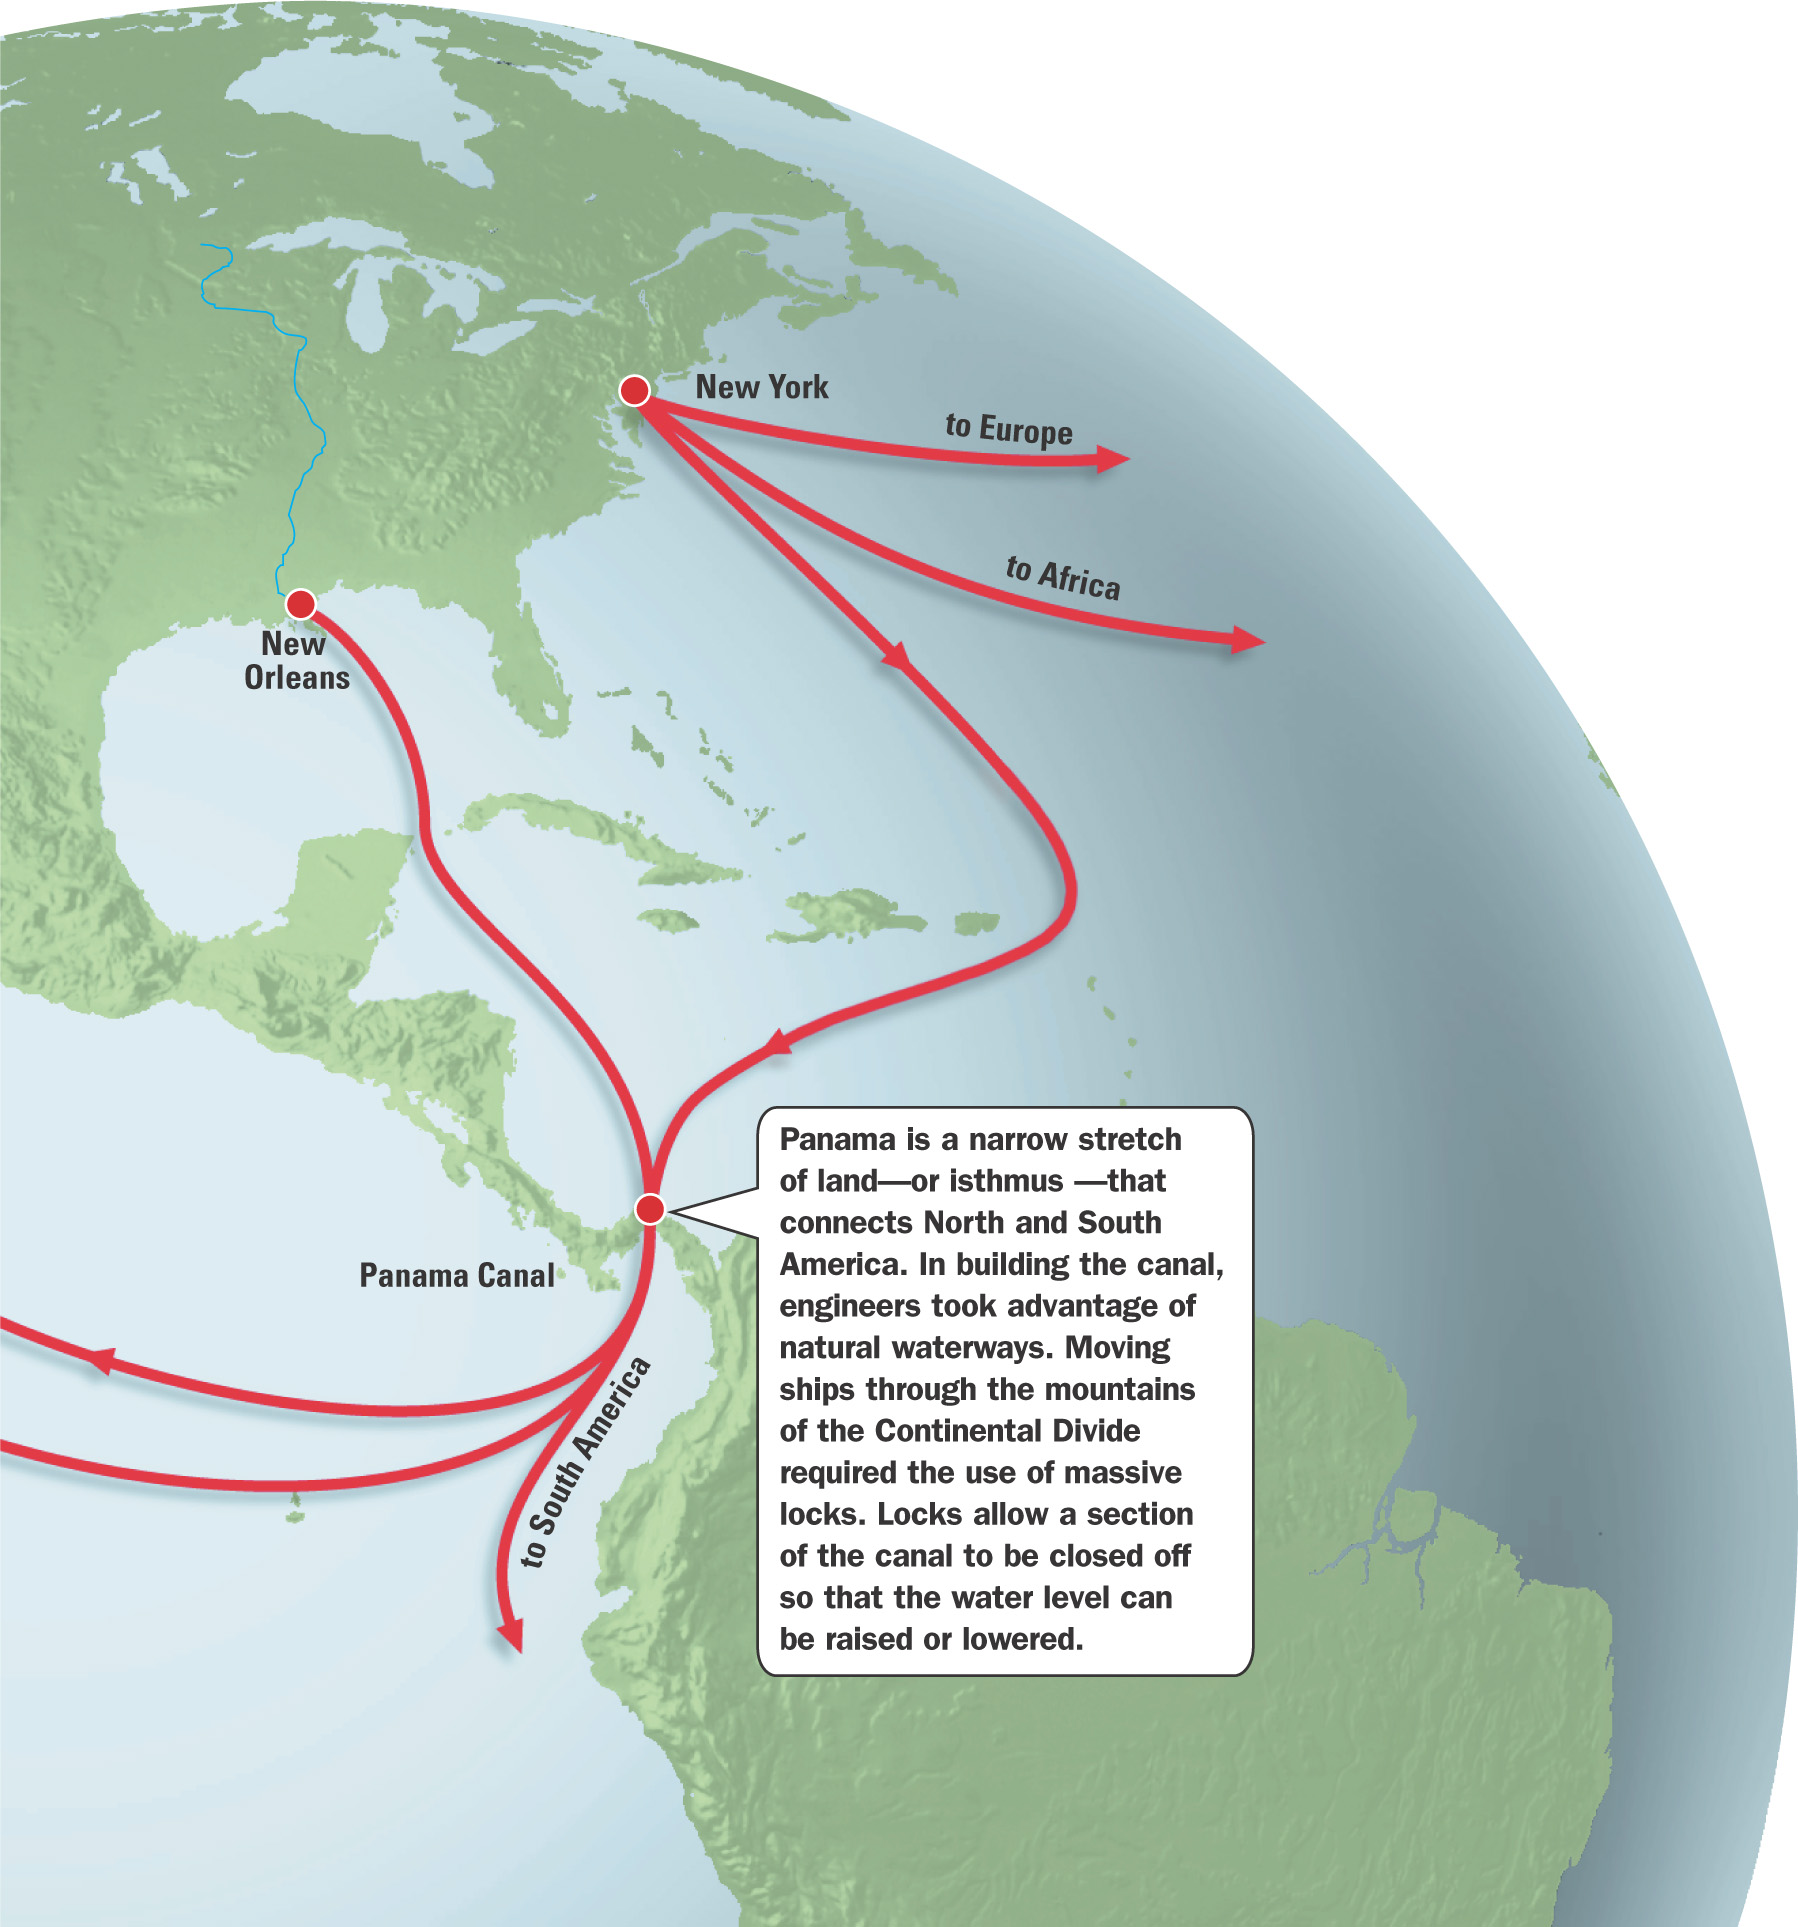 Illustration of North and South America shows routes from New Orleans and New York through the Panama Canal.